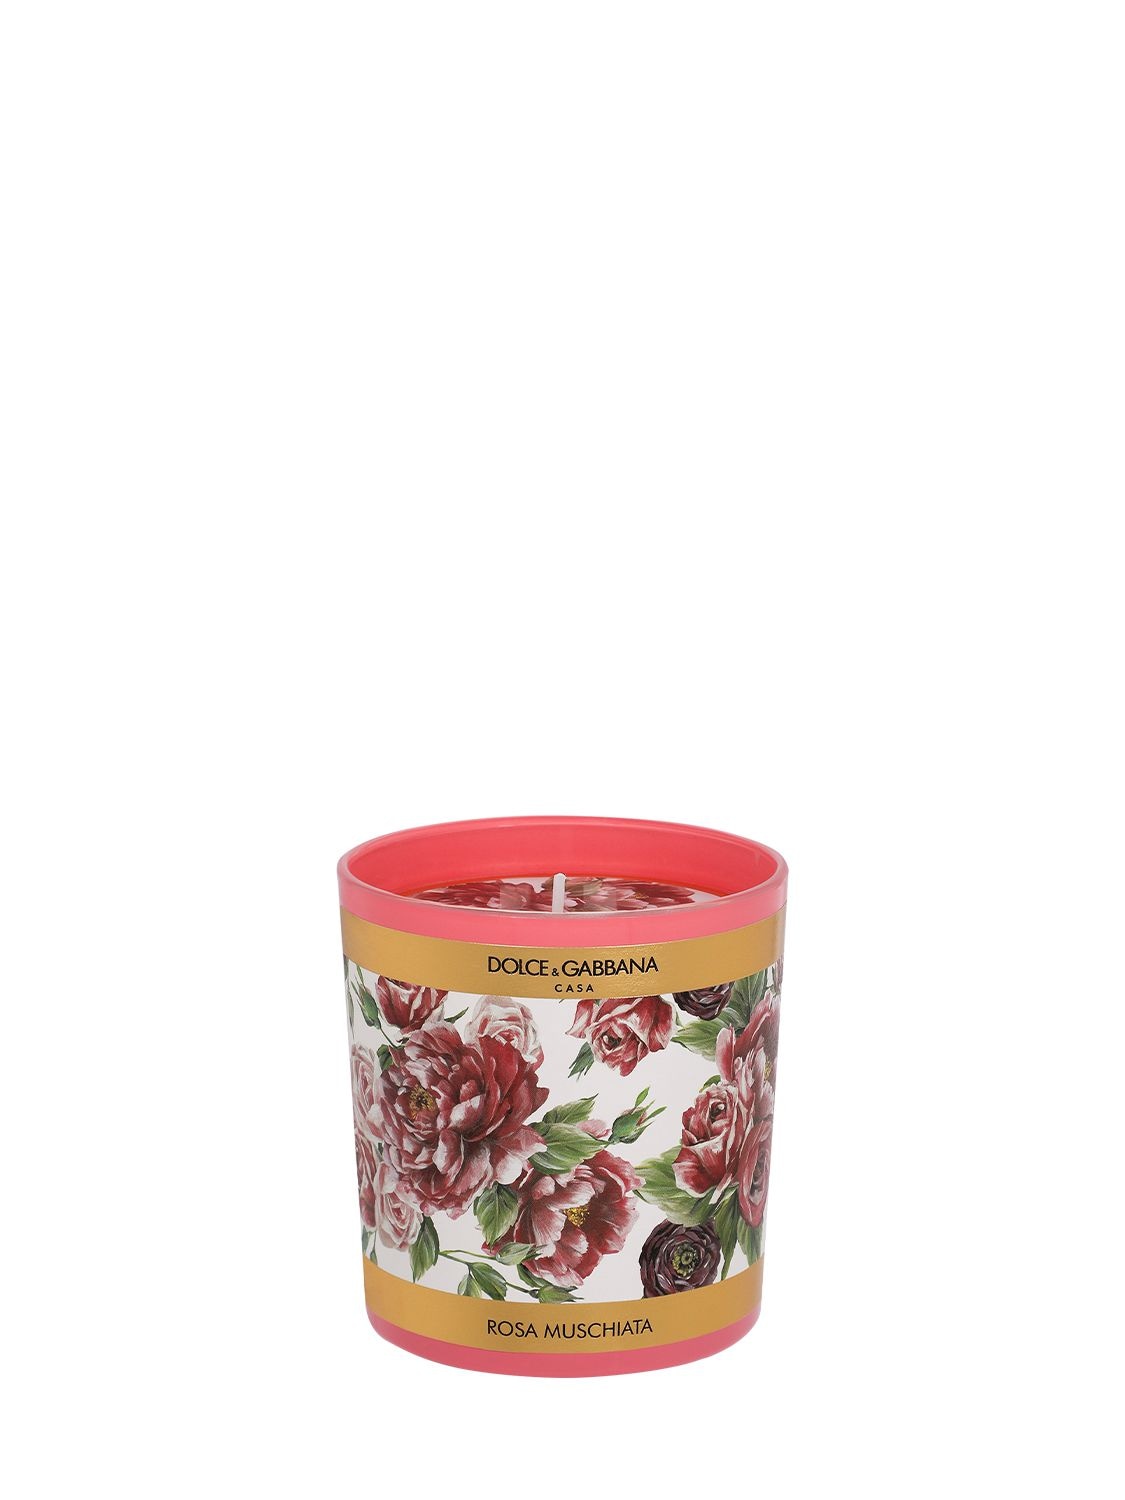 Dolce & Gabbana Musk Rose Scented Candle In Pink